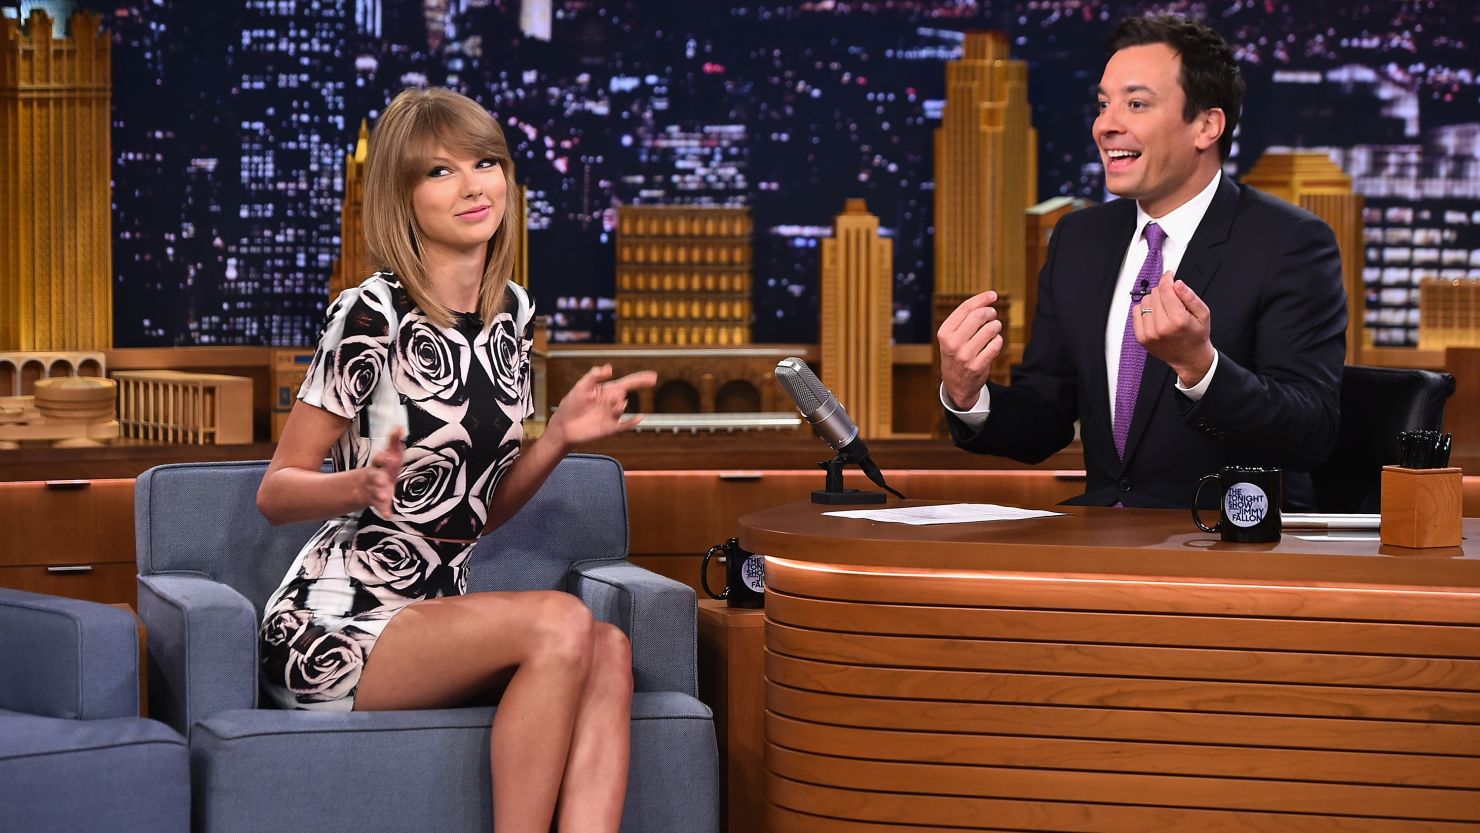 Taylor Swift, visiting "The Tonight Show Starring Jimmy Fallon" on Wednesday, is shaking off the haters.